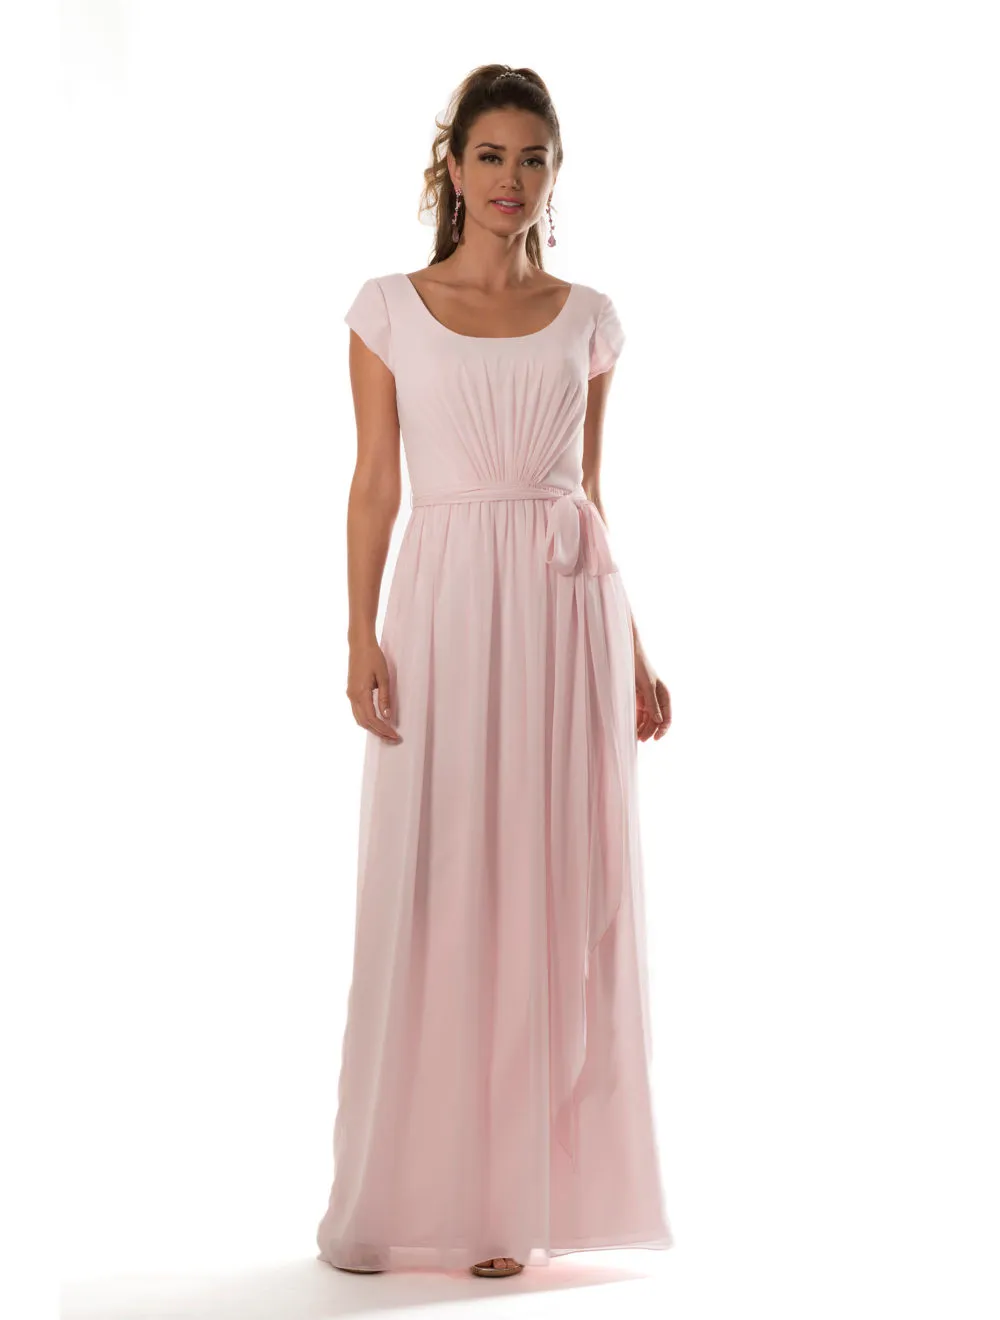 Light Pink Beach Long Modest Bridesmaid Dresses With Petal Sleeves A-line Sashes Country Chiffon Wedding Party Dresses New Custom Made